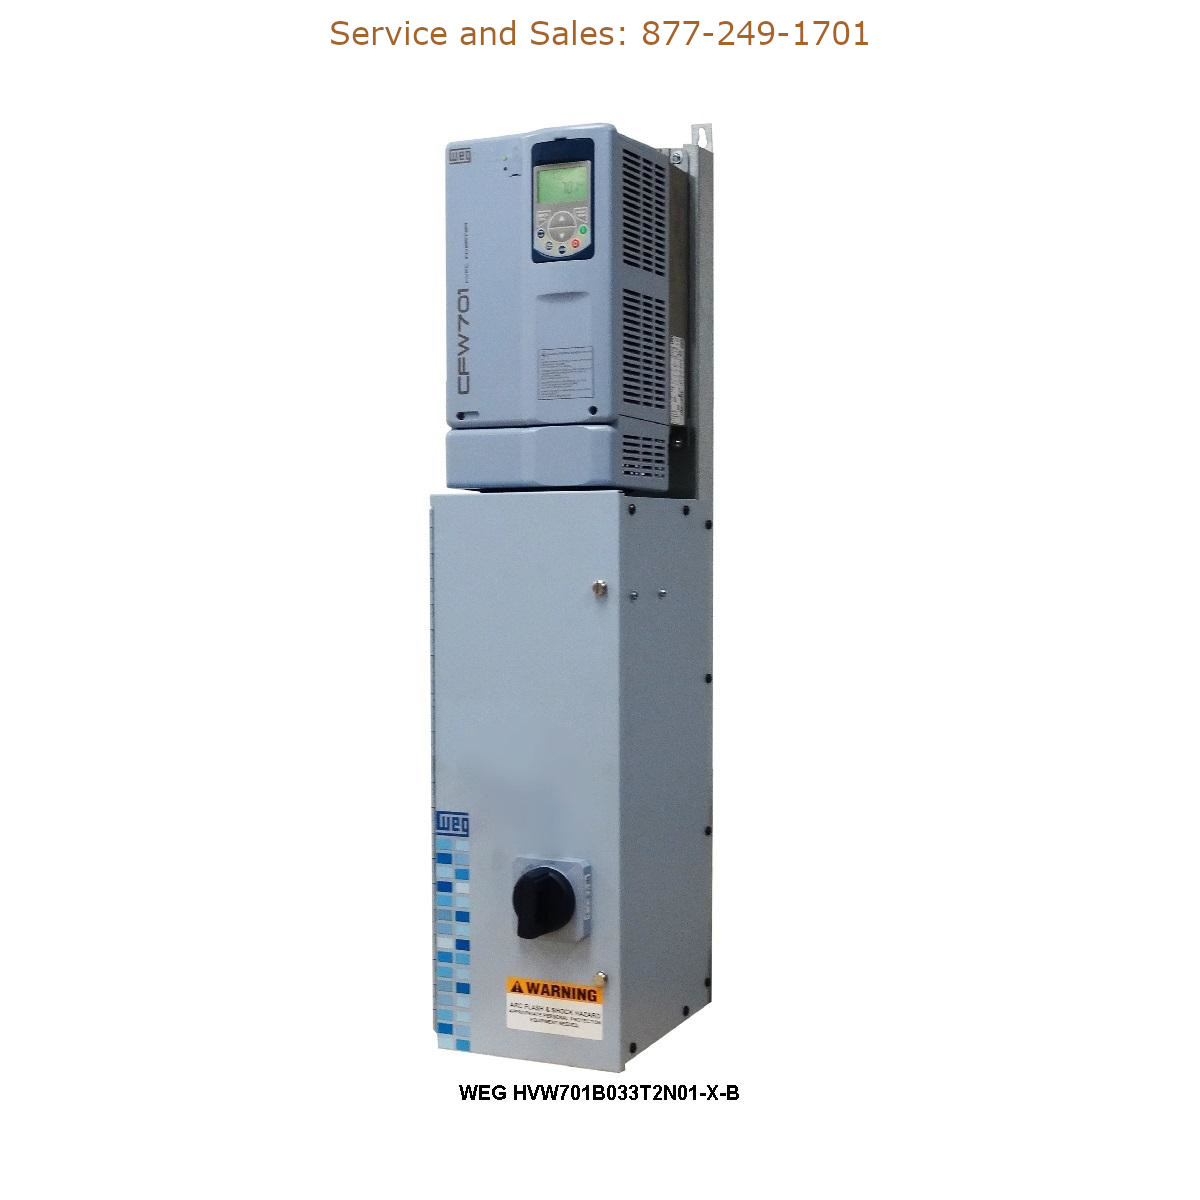 WEG HVW701B033T2N01-X-B WEG Model Number HVW701B033T2N01-X-B WEG Drives, Variable Speed Drives Repair Service, Troubleshooting, Replacement Parts https://gesrepair.com/wp-content/uploads/2022/WEG/WEG_HVW701B033T2N01-X-B_Drives_Variable_Speed_Drives.jpg